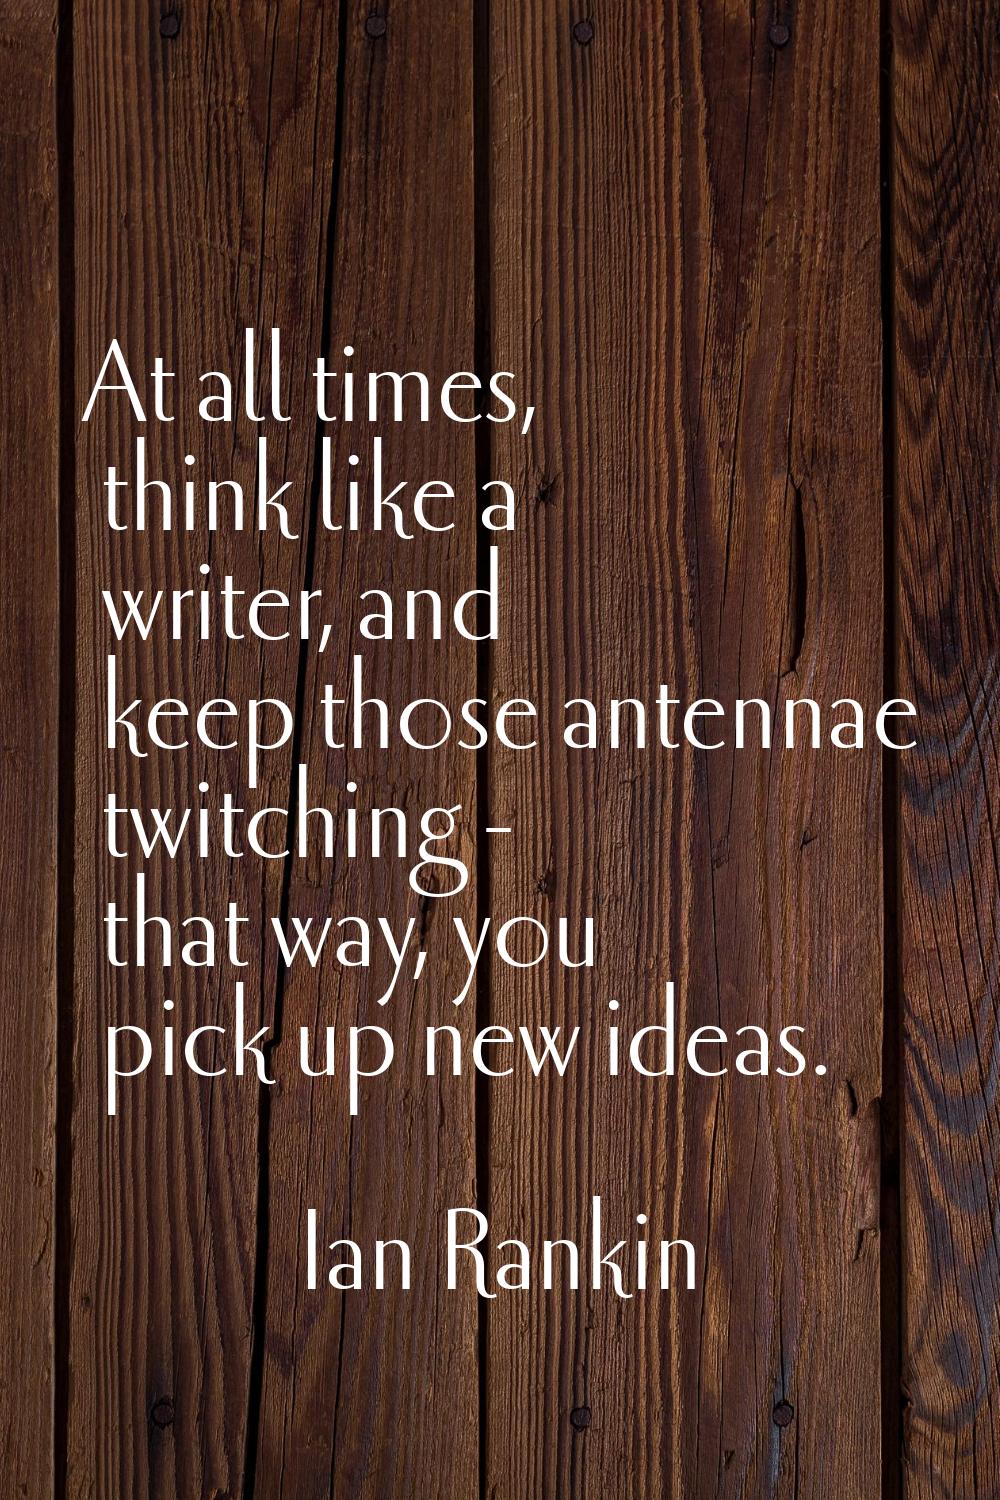 At all times, think like a writer, and keep those antennae twitching - that way, you pick up new id